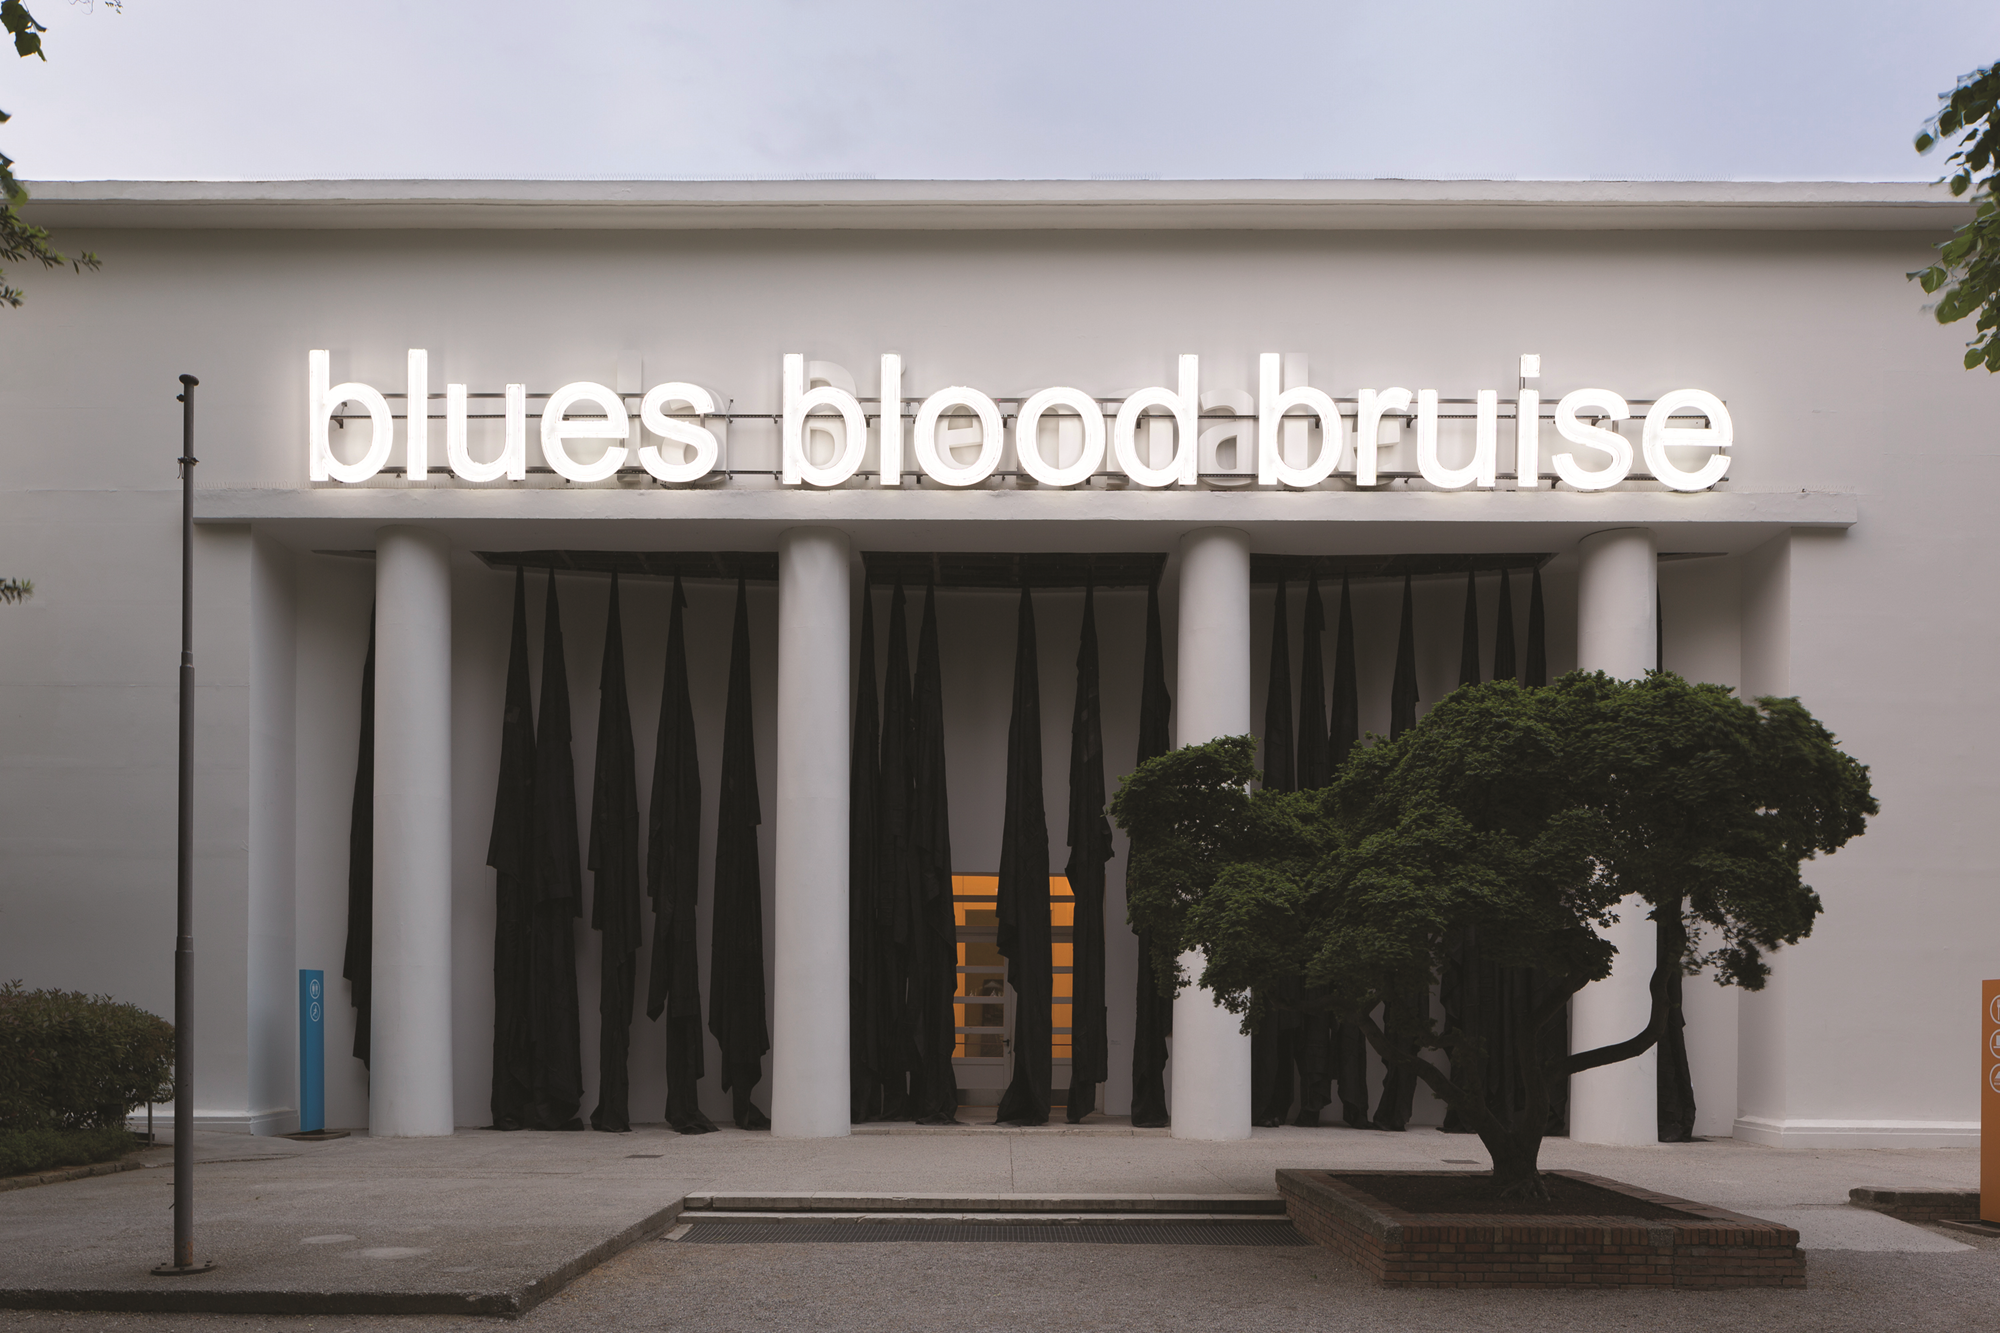 Glenn Ligon, A Small Band, 2015. Neon, paint, and metal support, Three components; “blues”: 74 x 231 in (188 x 586.7 cm); “blood”: 74 ¾ x 231 1/2 in (189.9 x 588 cm); “bruise”: 74 3/4 x 264 3/4 in (189.9 x 672.5 cm); overall approx. 74 3/4 x 797 1/2 in (189.9 x 2025.7 cm). © Glenn Ligon. Courtesy the artist, Hauser & Wirth, New York, Regen Projects, Los Angeles, Thomas Dane Gallery, London, and Chantal Crousel, Paris. Photo: Roberto Marossi